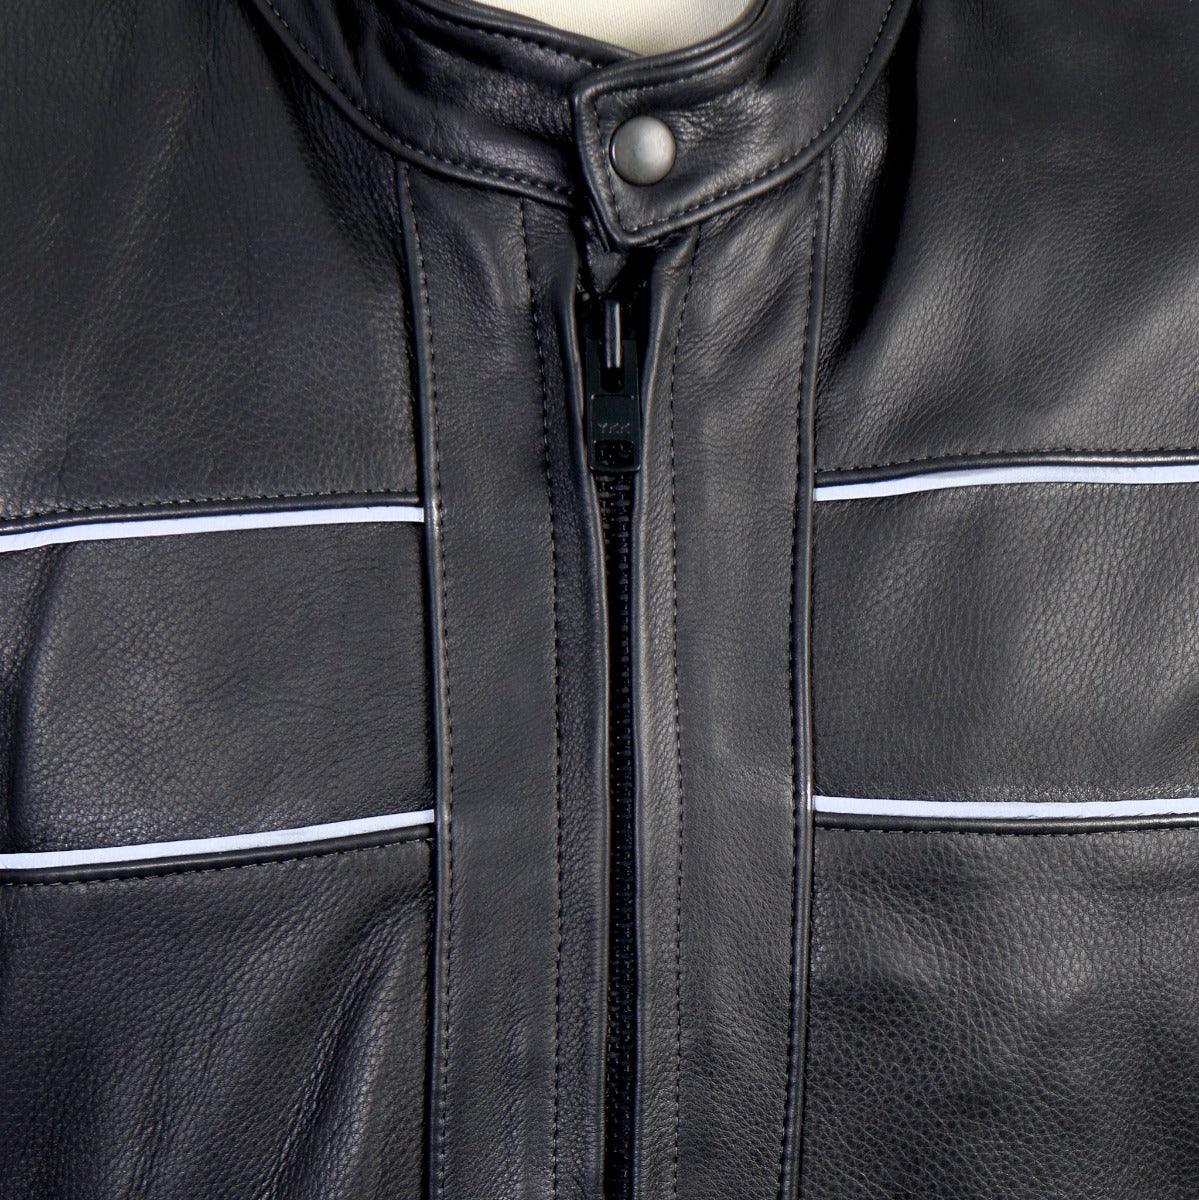 Hot Leathers Men's Usa Made Premium Leather Motorcycle Jacket With Reflective Piping - American Legend Rider